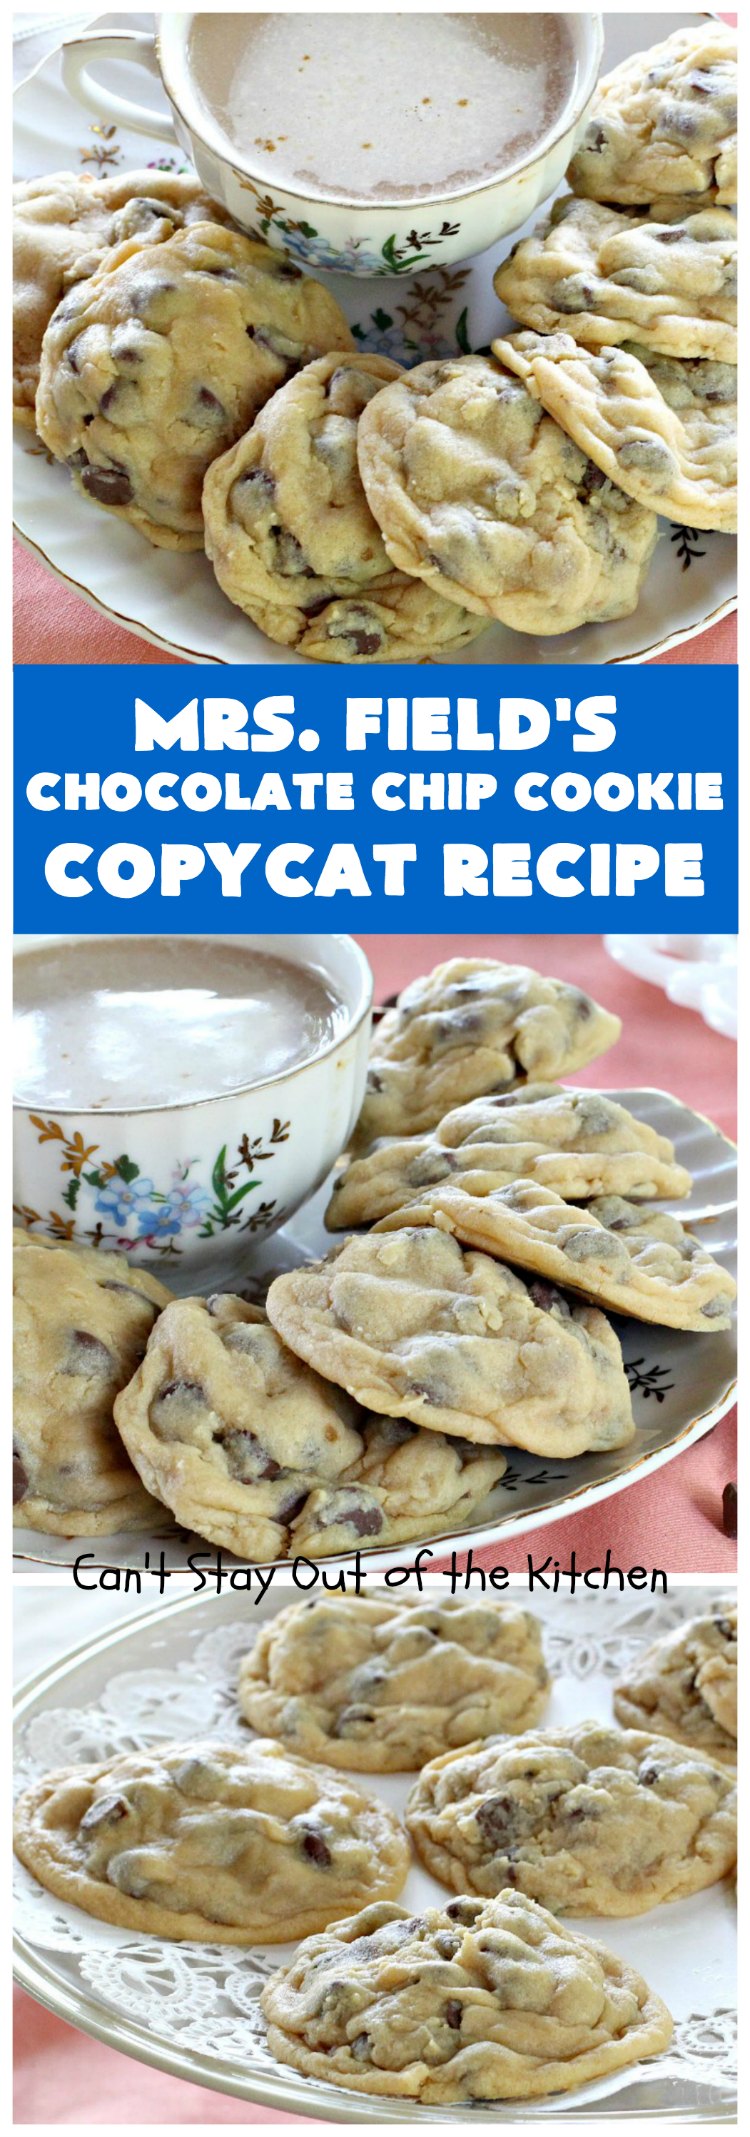 Mrs. Field's Chocolate Chip Cookie Copycat Recipe | Can't Stay Out of the KitchenMrs. Field's Chocolate Chip Cookie Copycat Recipe | Can't Stay Out of the Kitchen